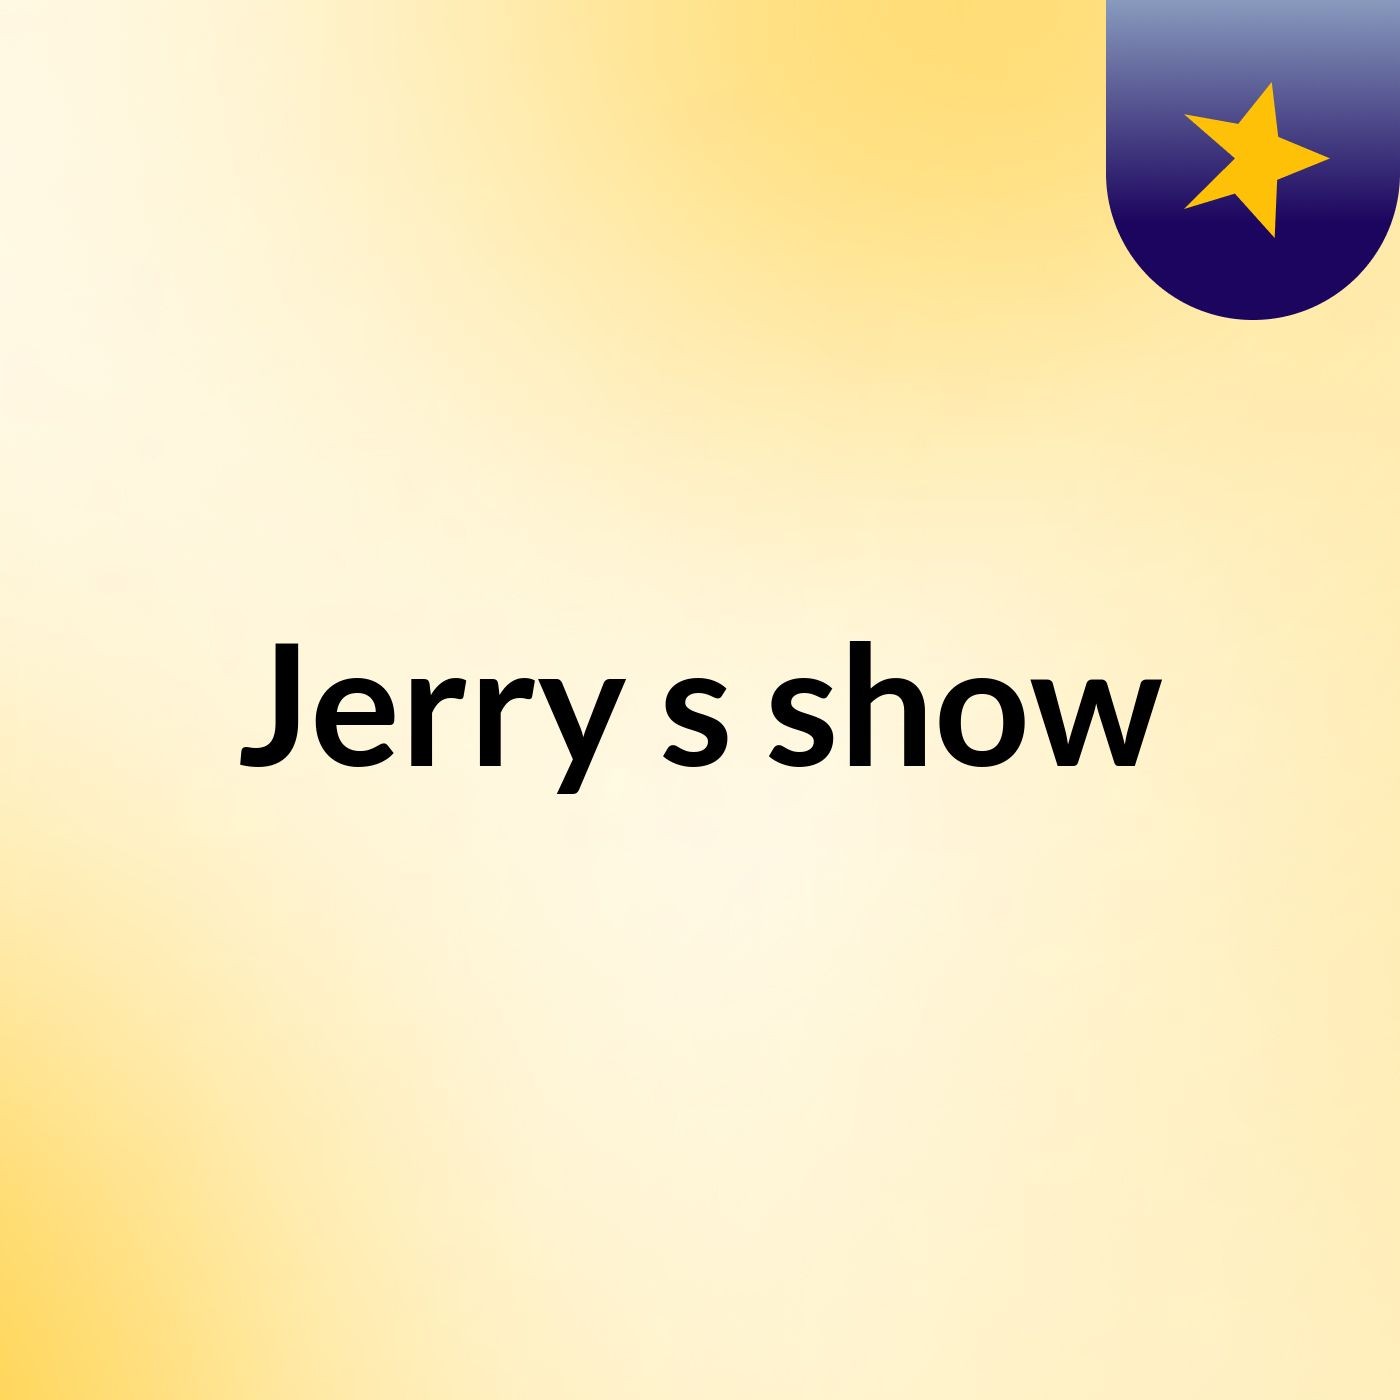 Jerry's show